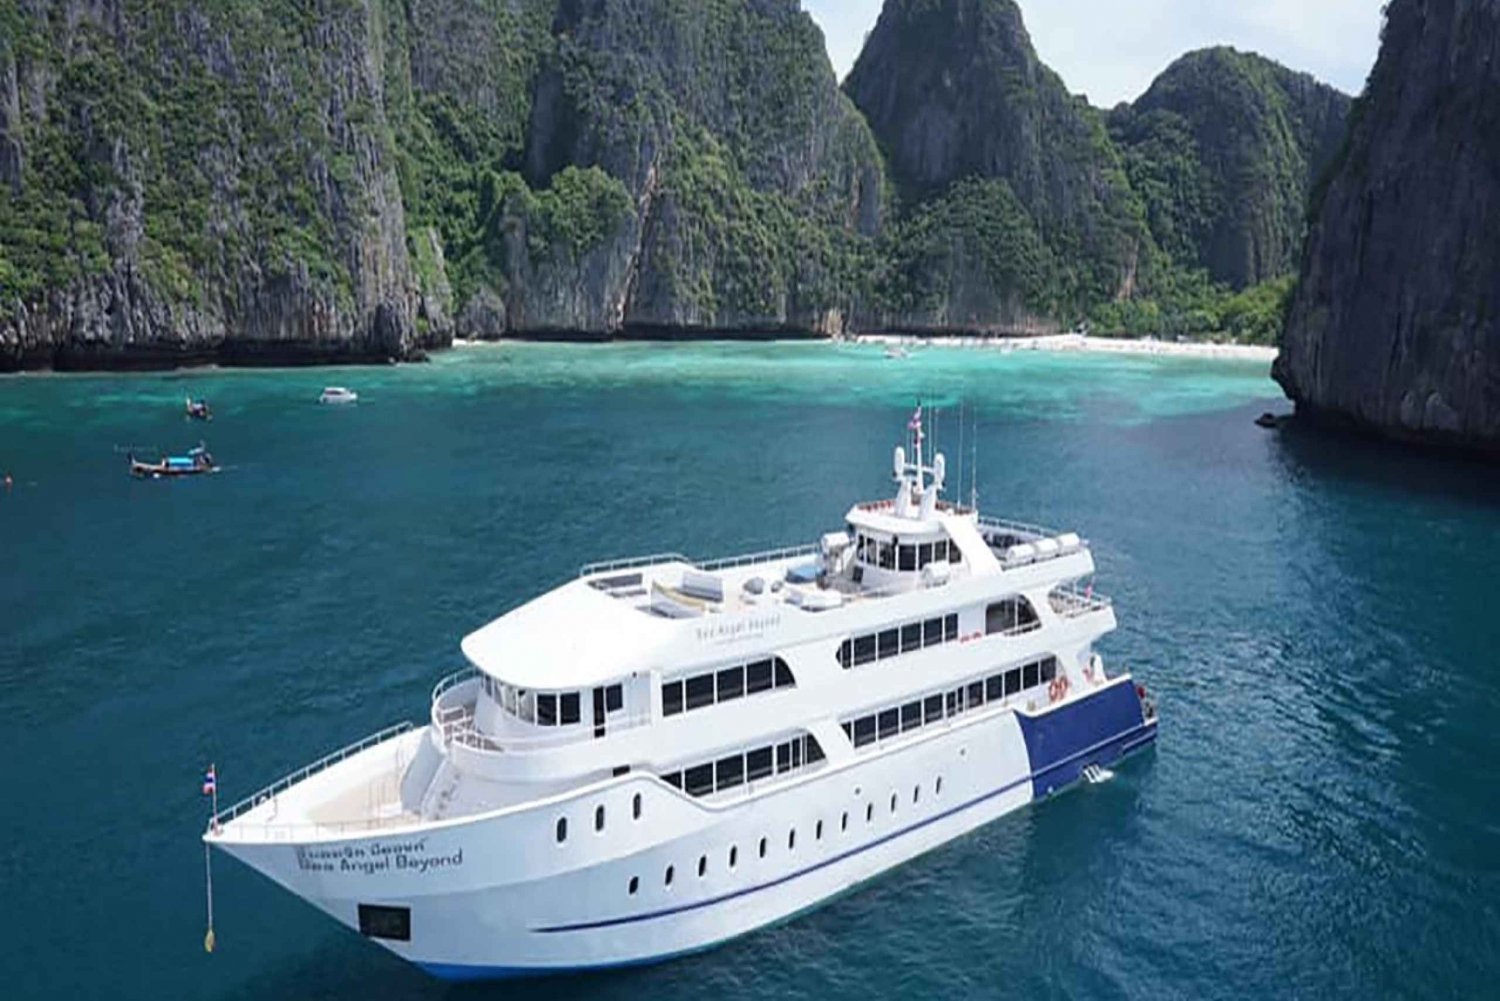 Phuket: Full-Day Trip to Phi Phi Islands by Ferry with Lunch